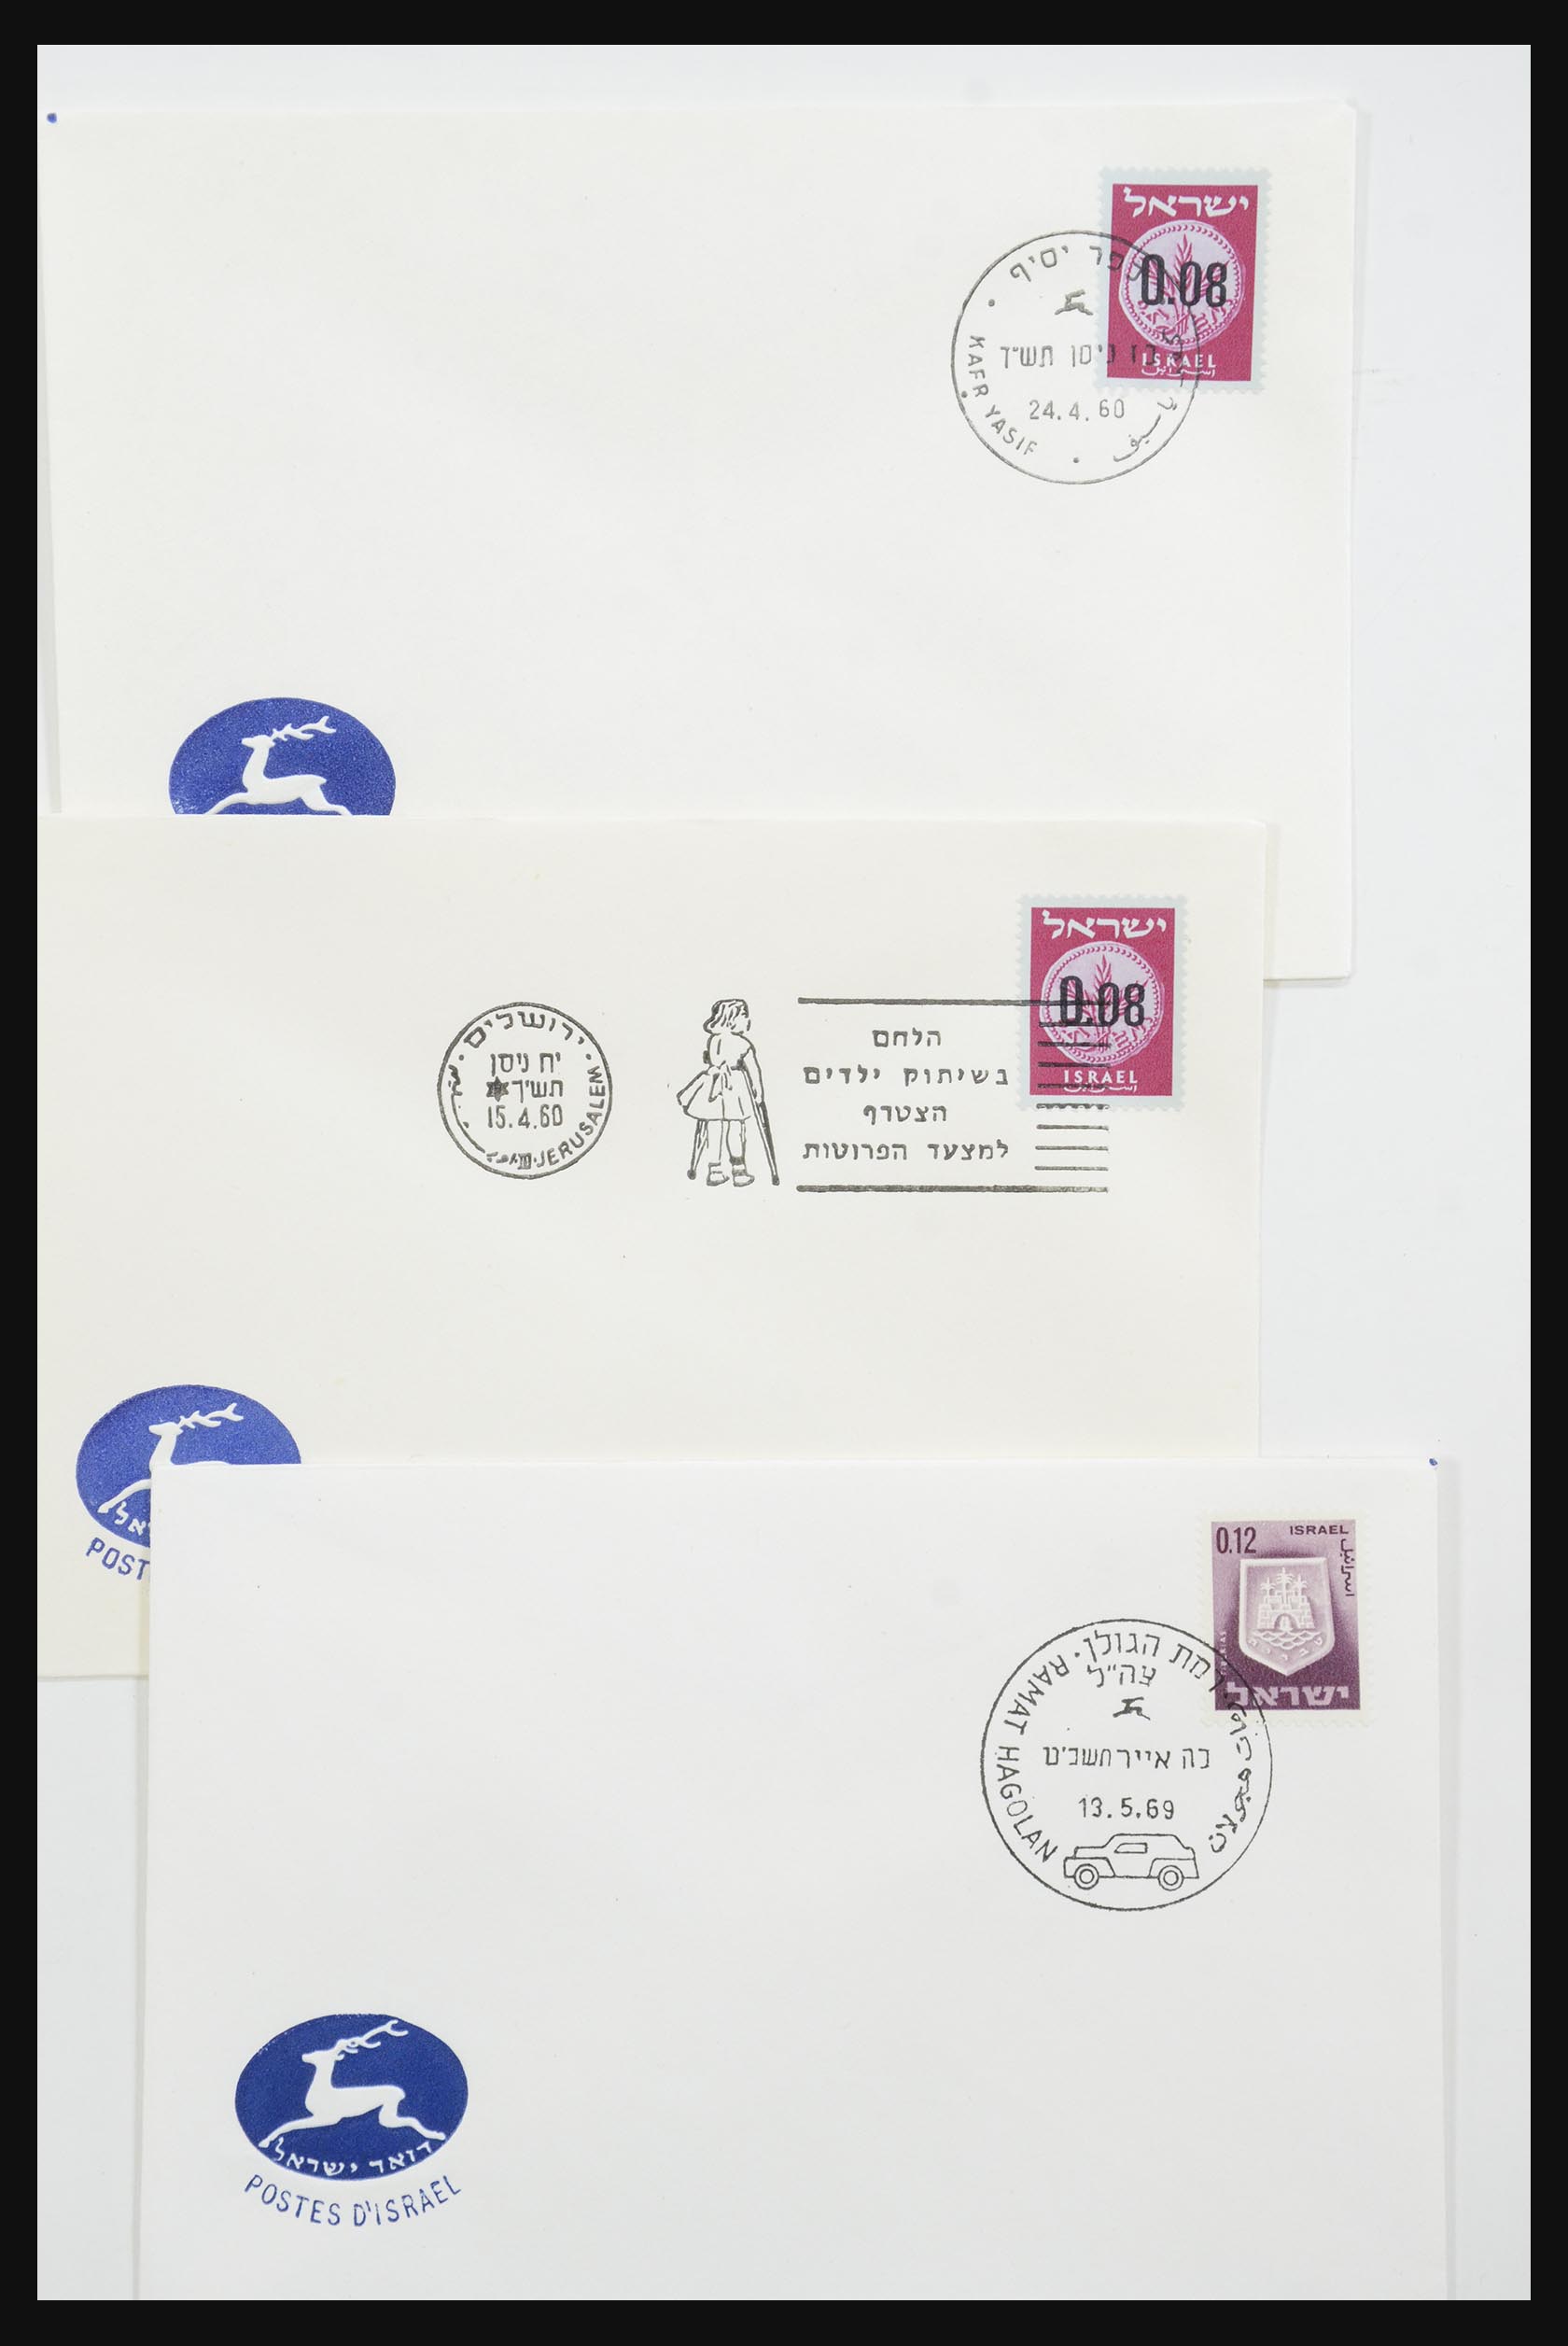 31924 059 - 31924 Israel first day cover collection 1957-2003.